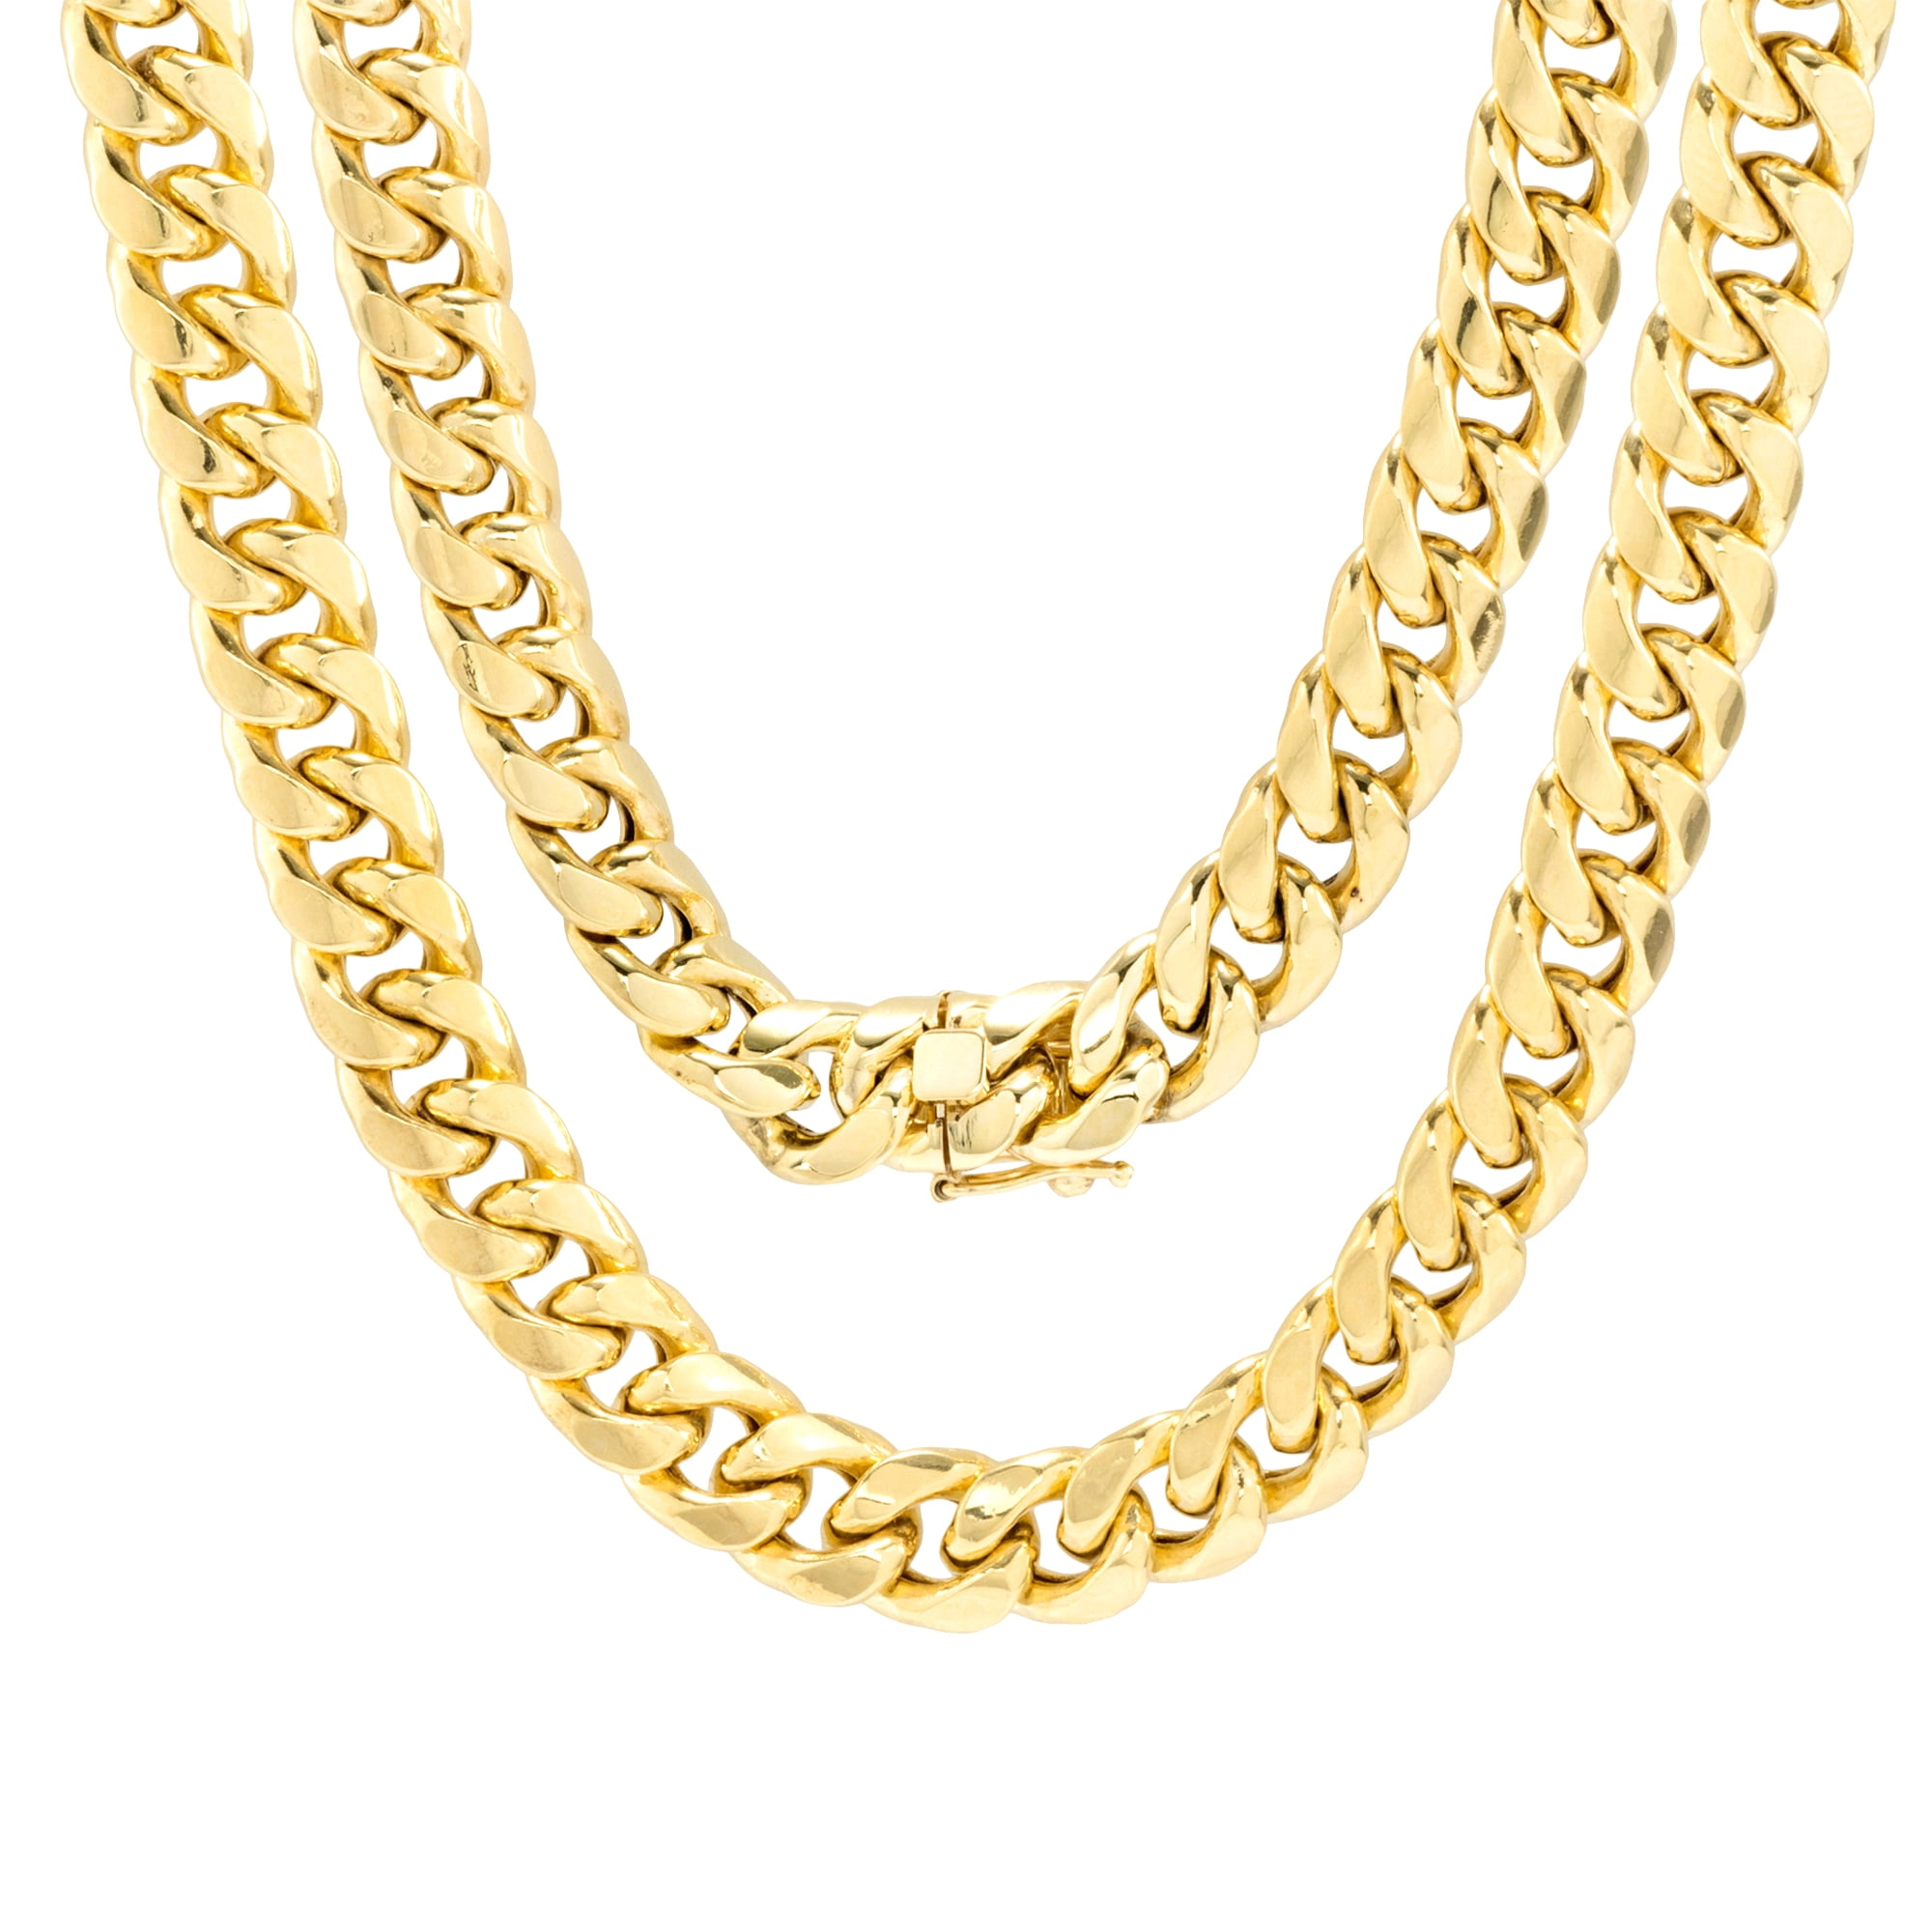 Nuragold 10k Yellow Gold 9mm Miami Cuban Link Chain Necklace, Mens Wide  Jewelry Box Clasp 20